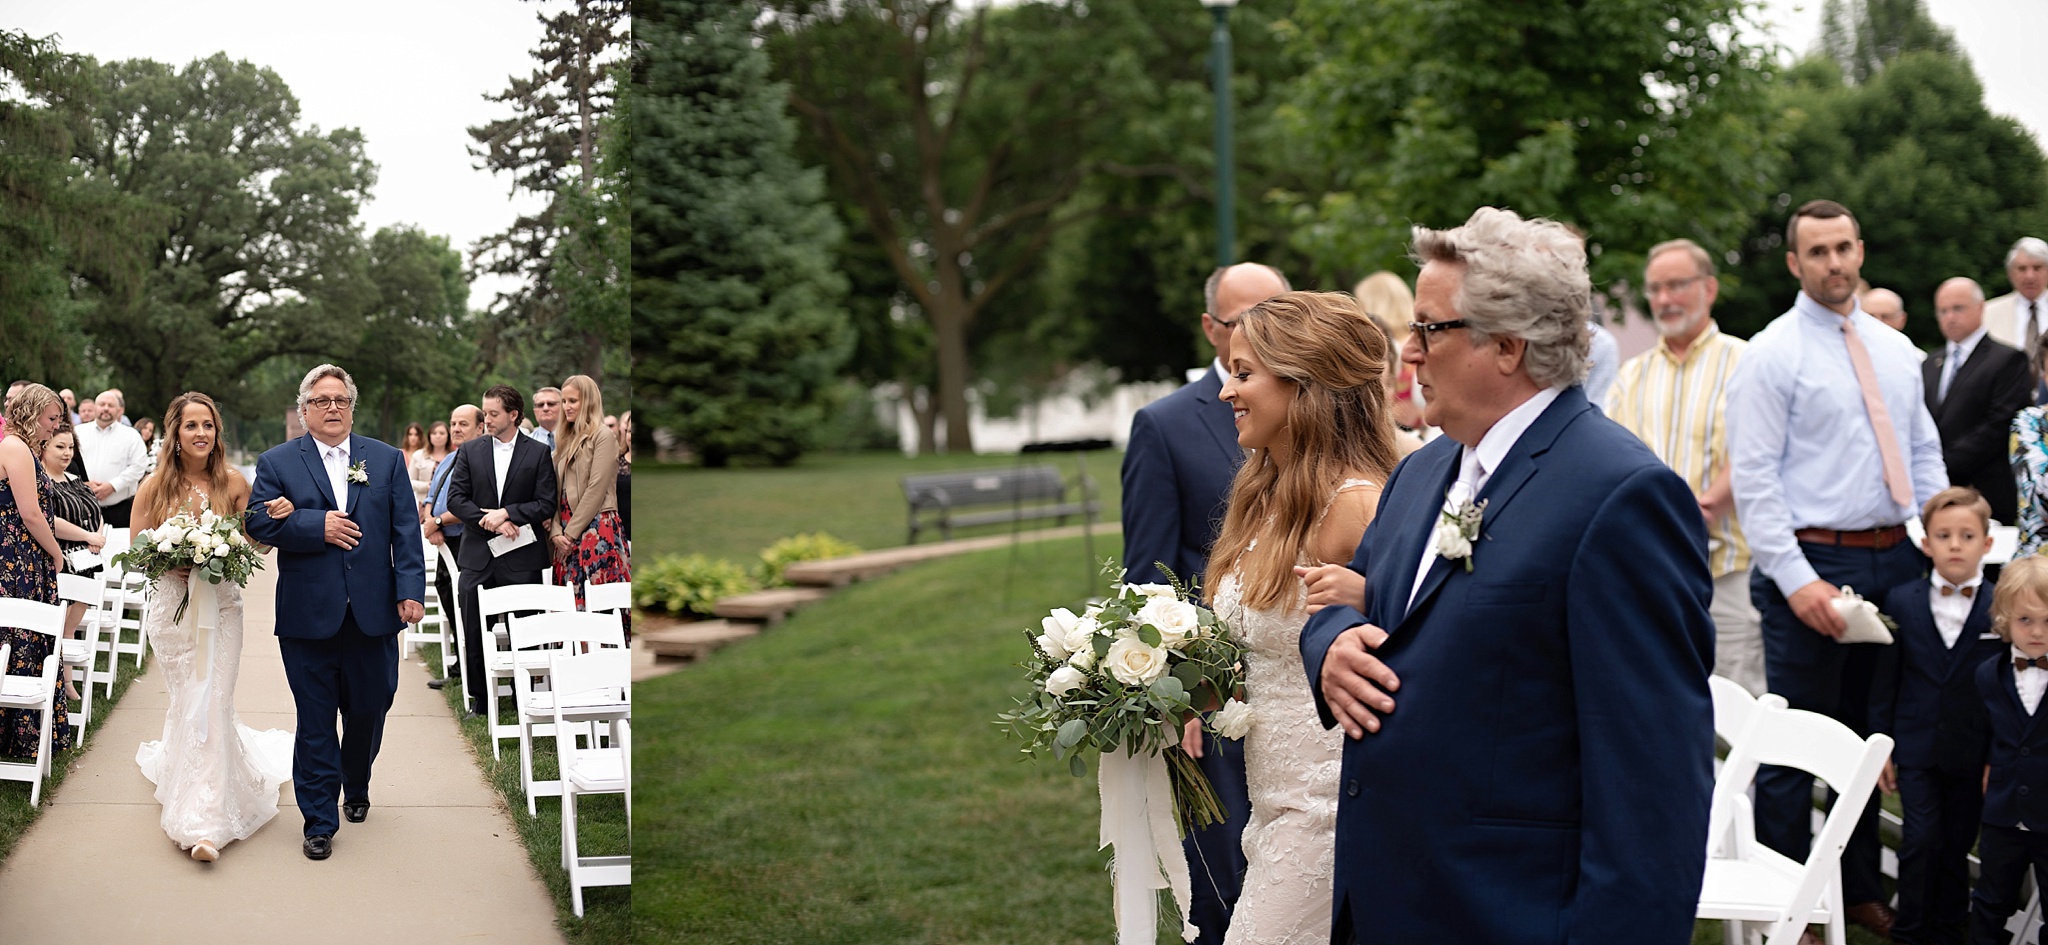 father of the bride walks the bride down the aisle in garden wedding